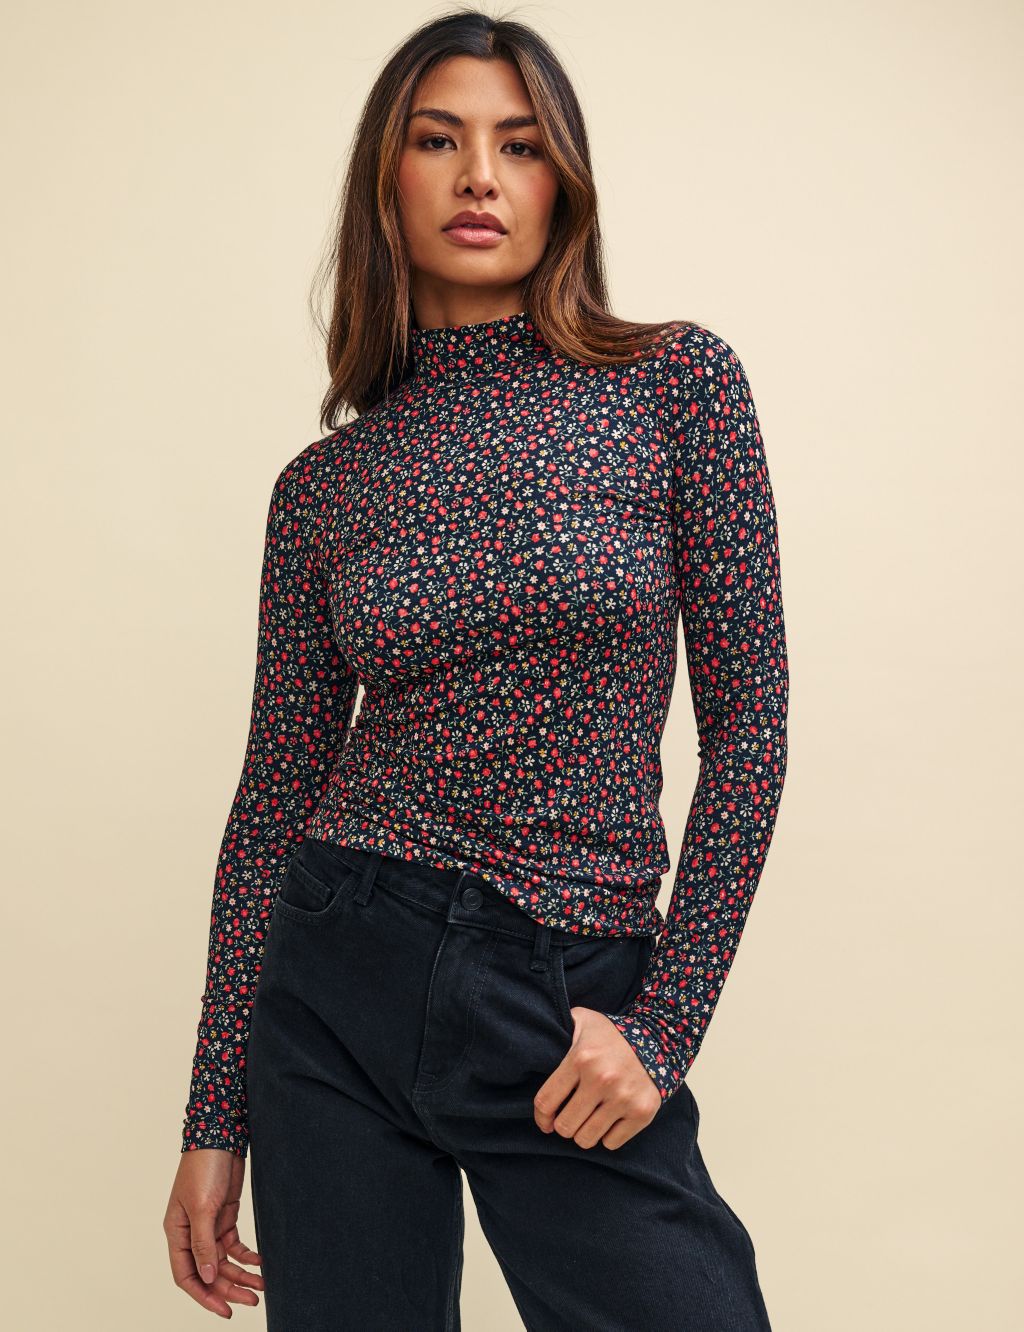 Jersey Floral Top image 1